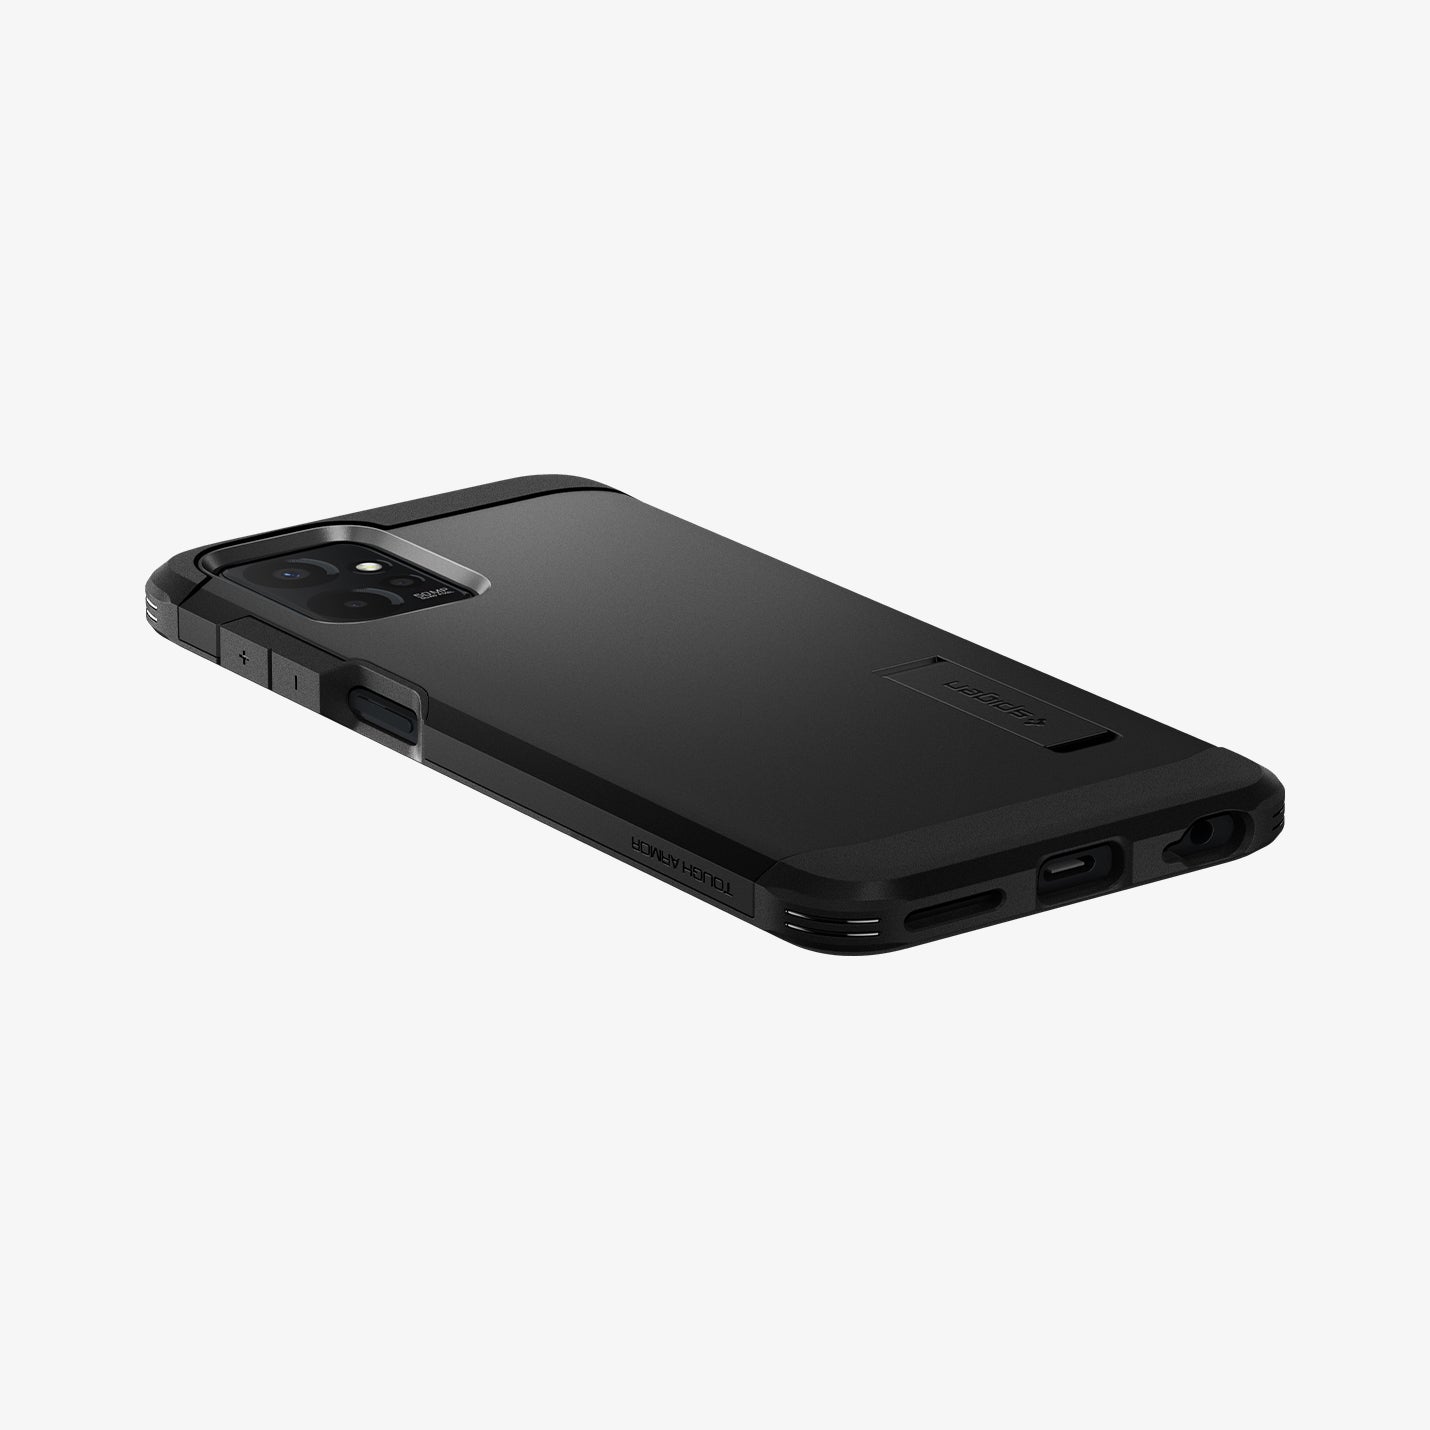 ACS06433 - Moto G Power Case Tough Armor in black showing the back, side and bottom